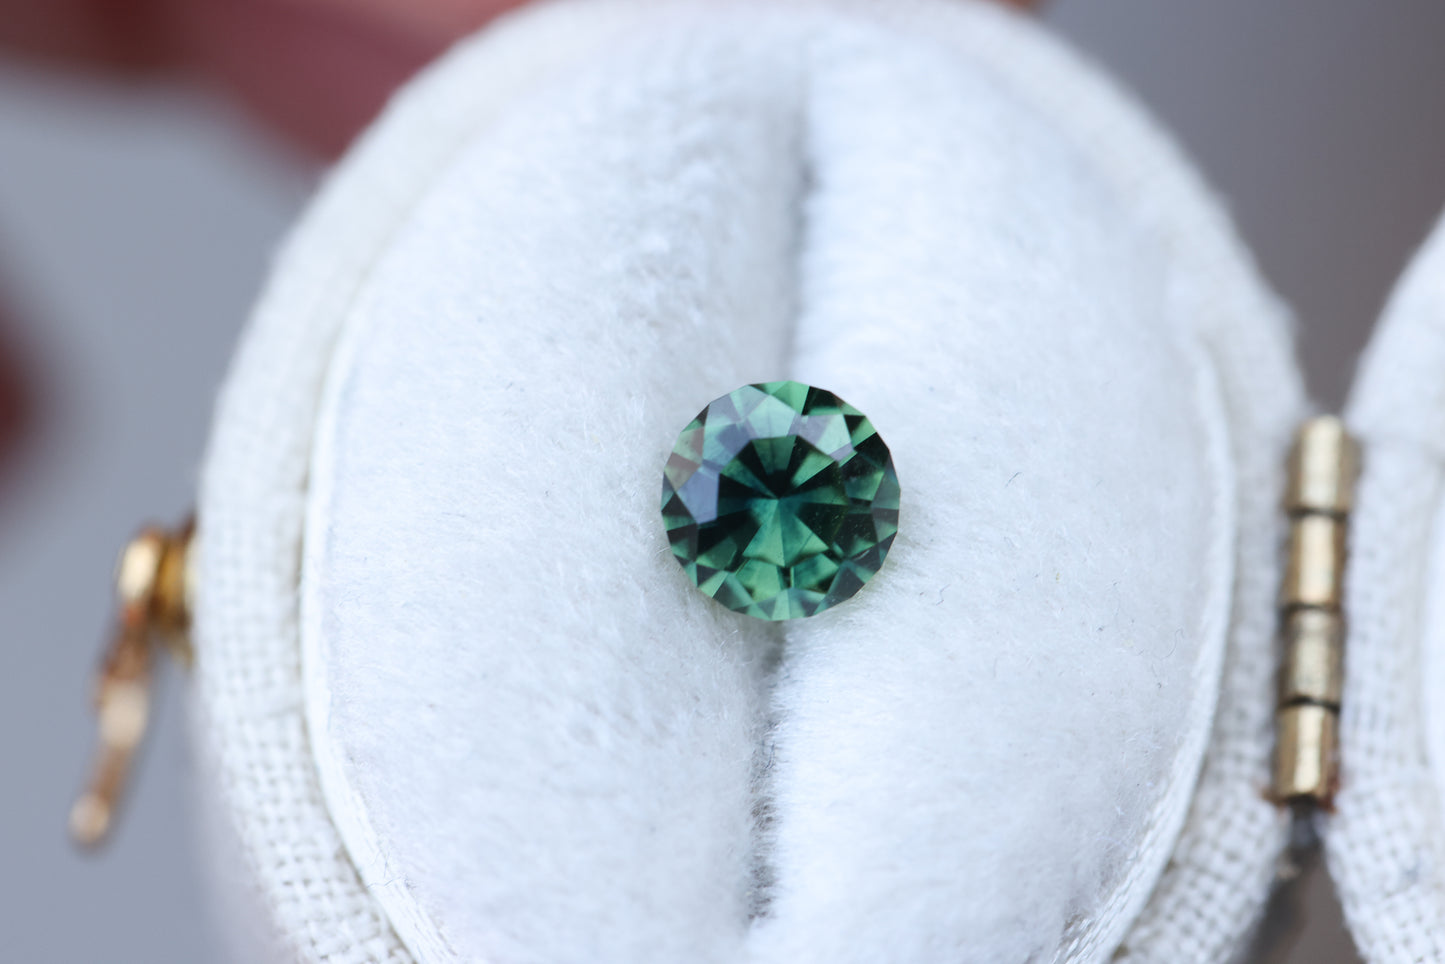 1.18ct round green sapphire - Regal Radiant cut by John Dyer